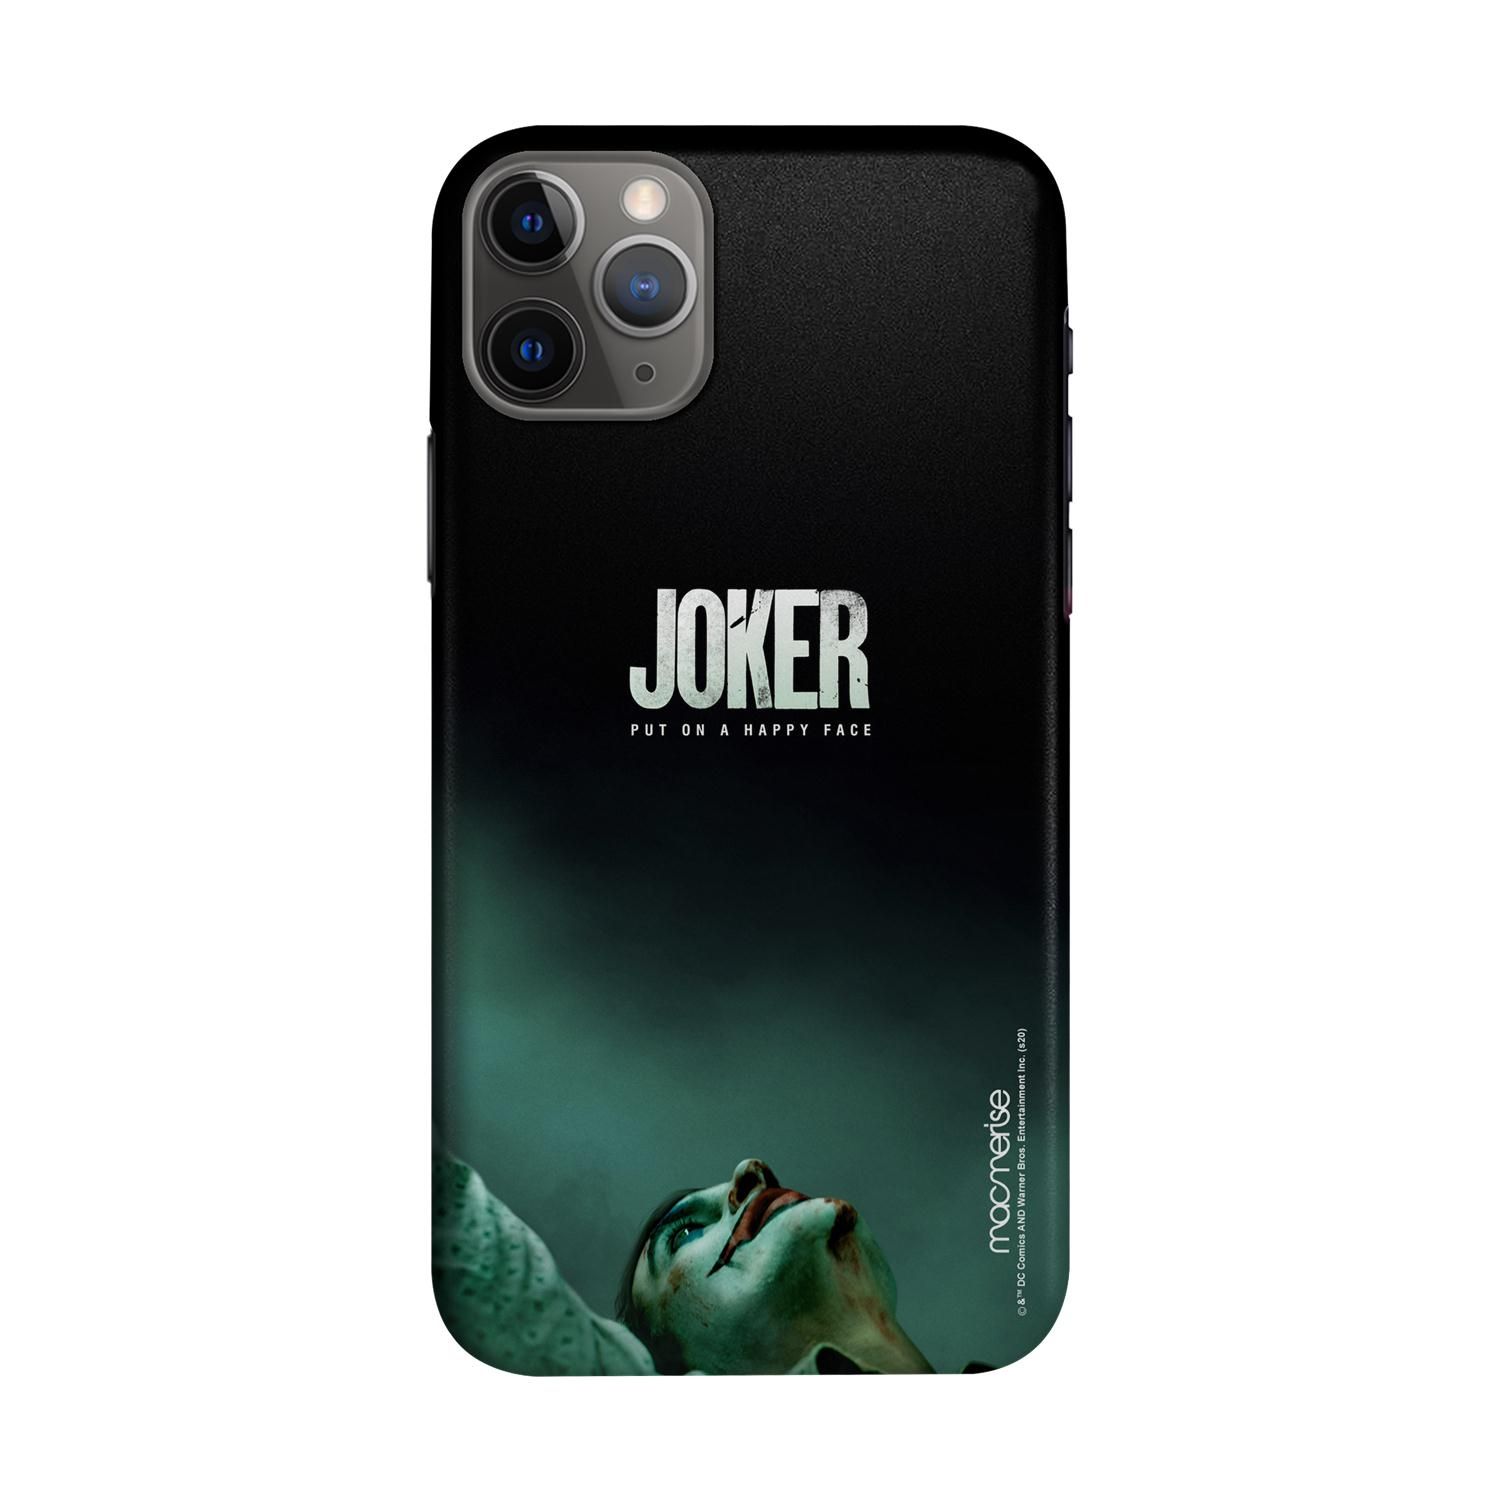 Buy Rise of the Joker - Sleek Phone Case for iPhone 11 Pro Max Online